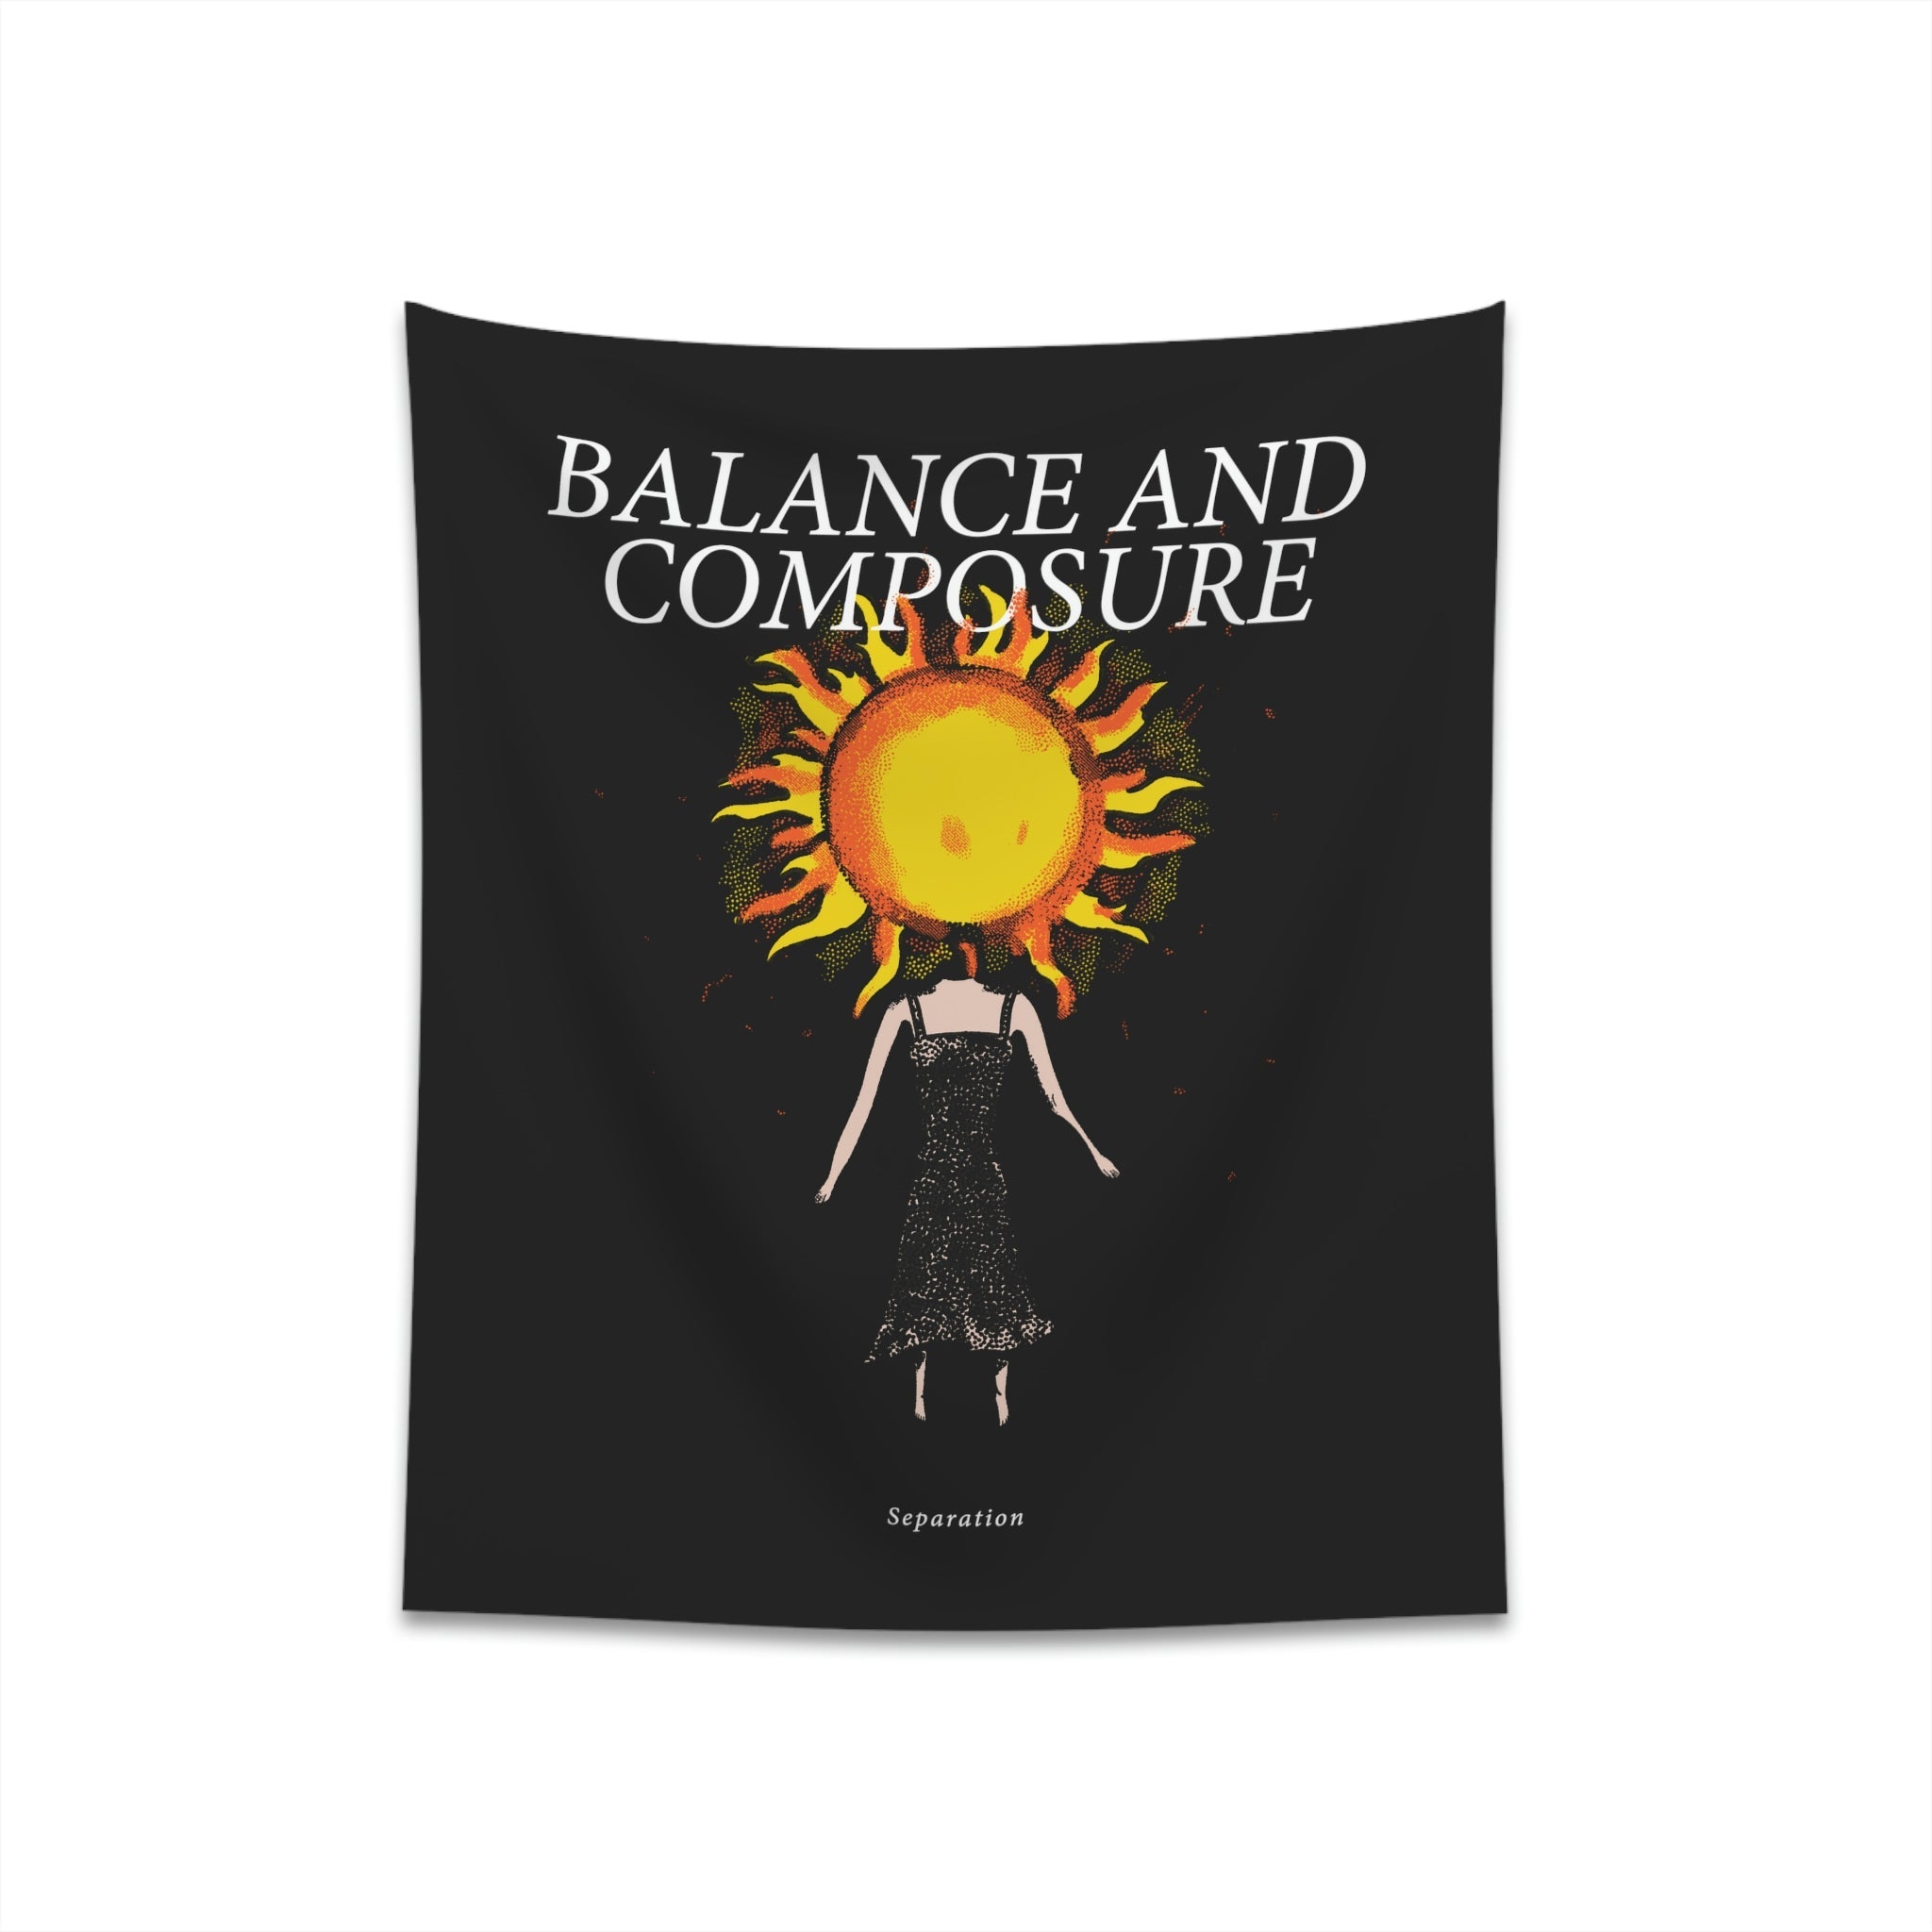 Separation Wall Tapestry - NO SLEEP RECORDS - Balance and Composure